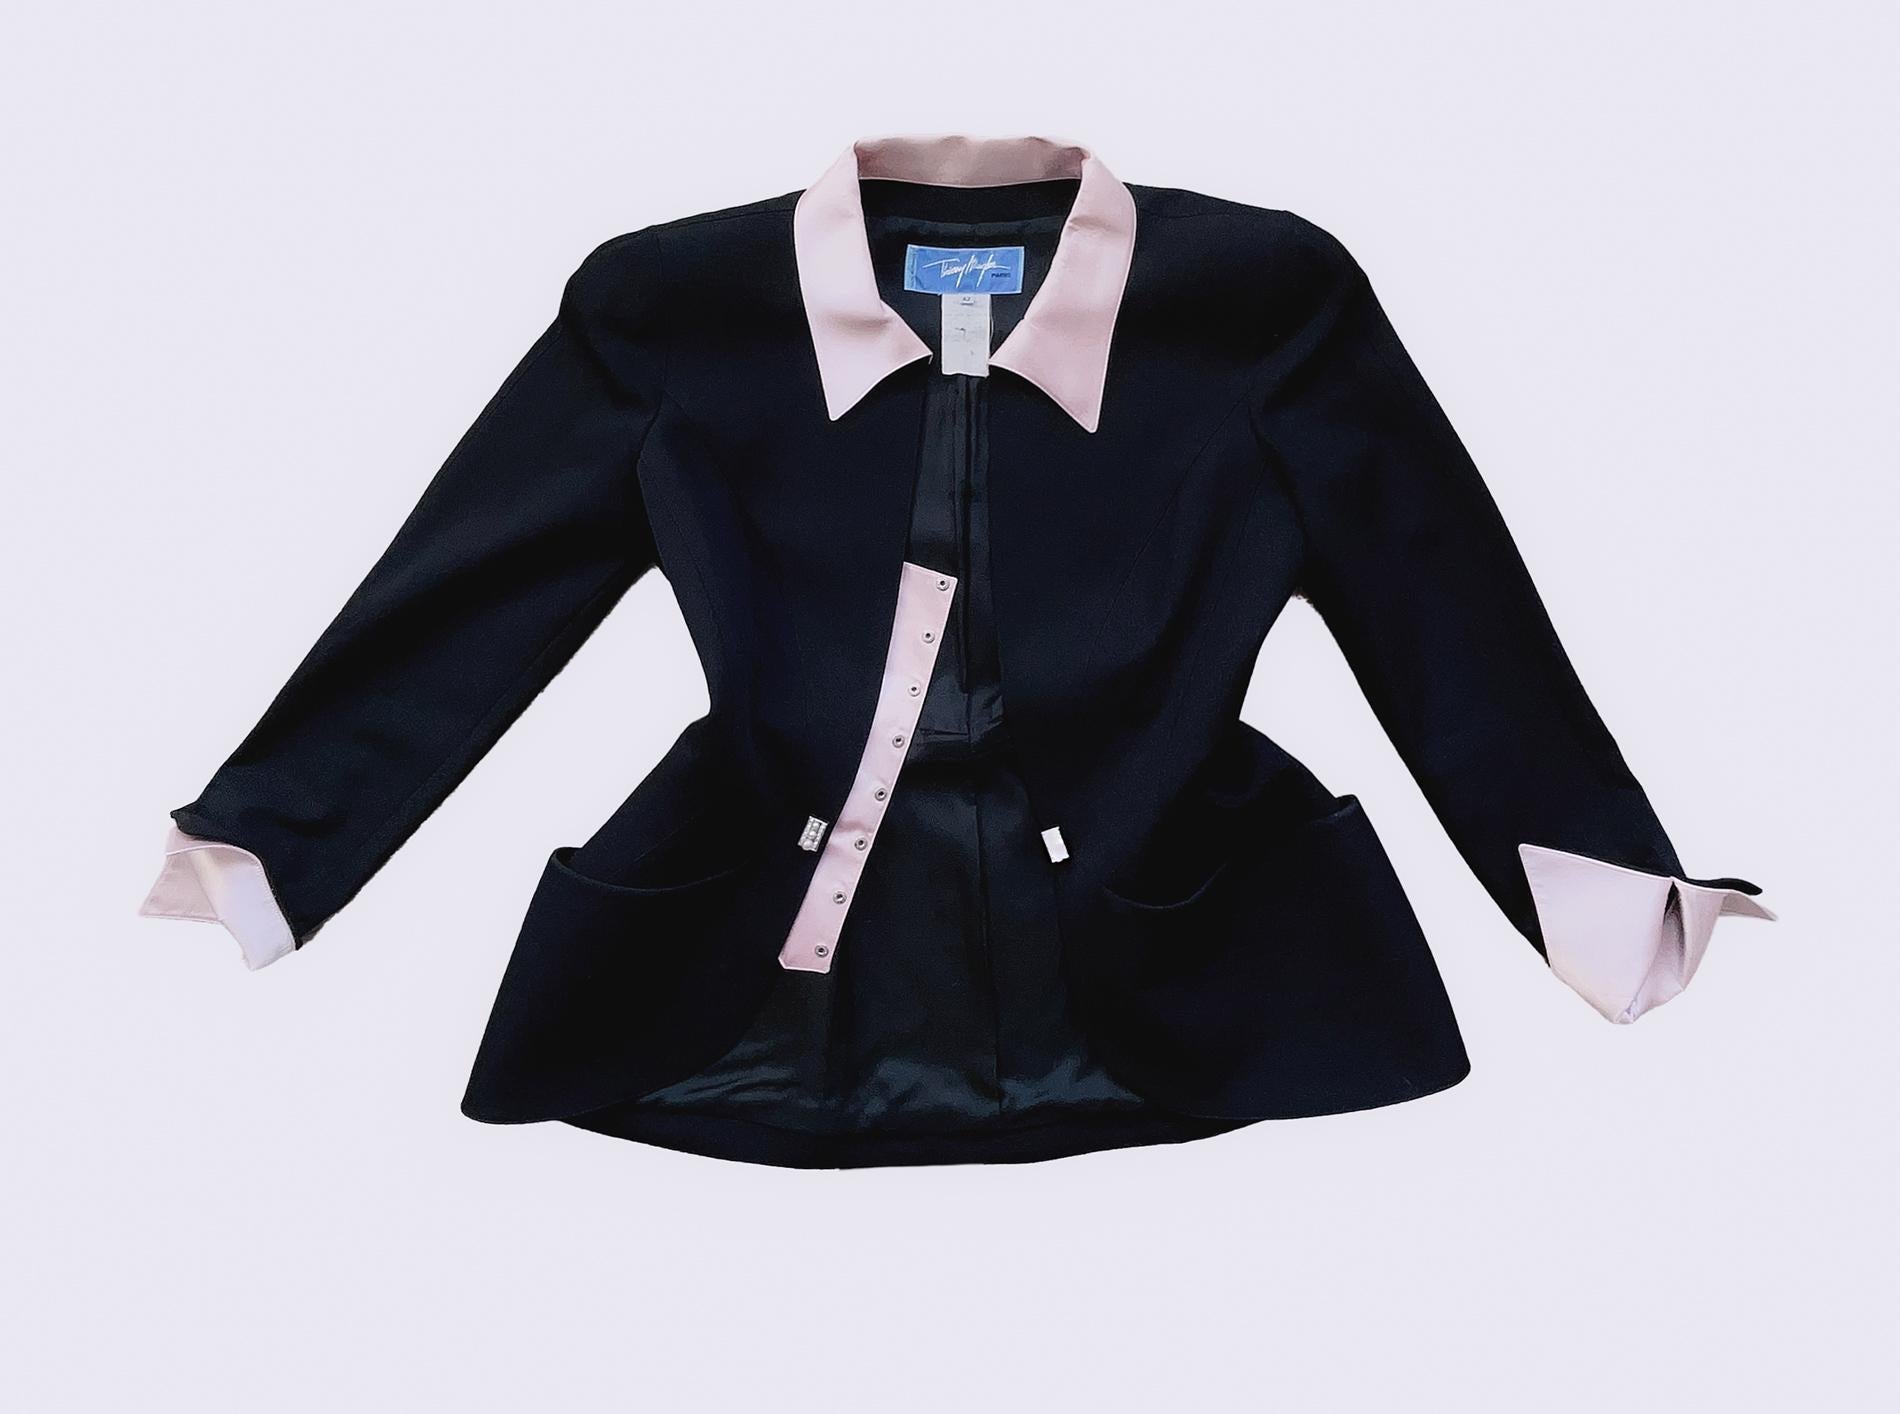 
Thierry Mugler Jacket 'Corporate Class' Collection FW1996

Luxurious glam jacket by legend Manfred Thierry Mugler. Dramatic silky collar and cuffs, extremely well tailored jacket with fitted feminie shape. Extraordinairy sculptural silhouette -
the